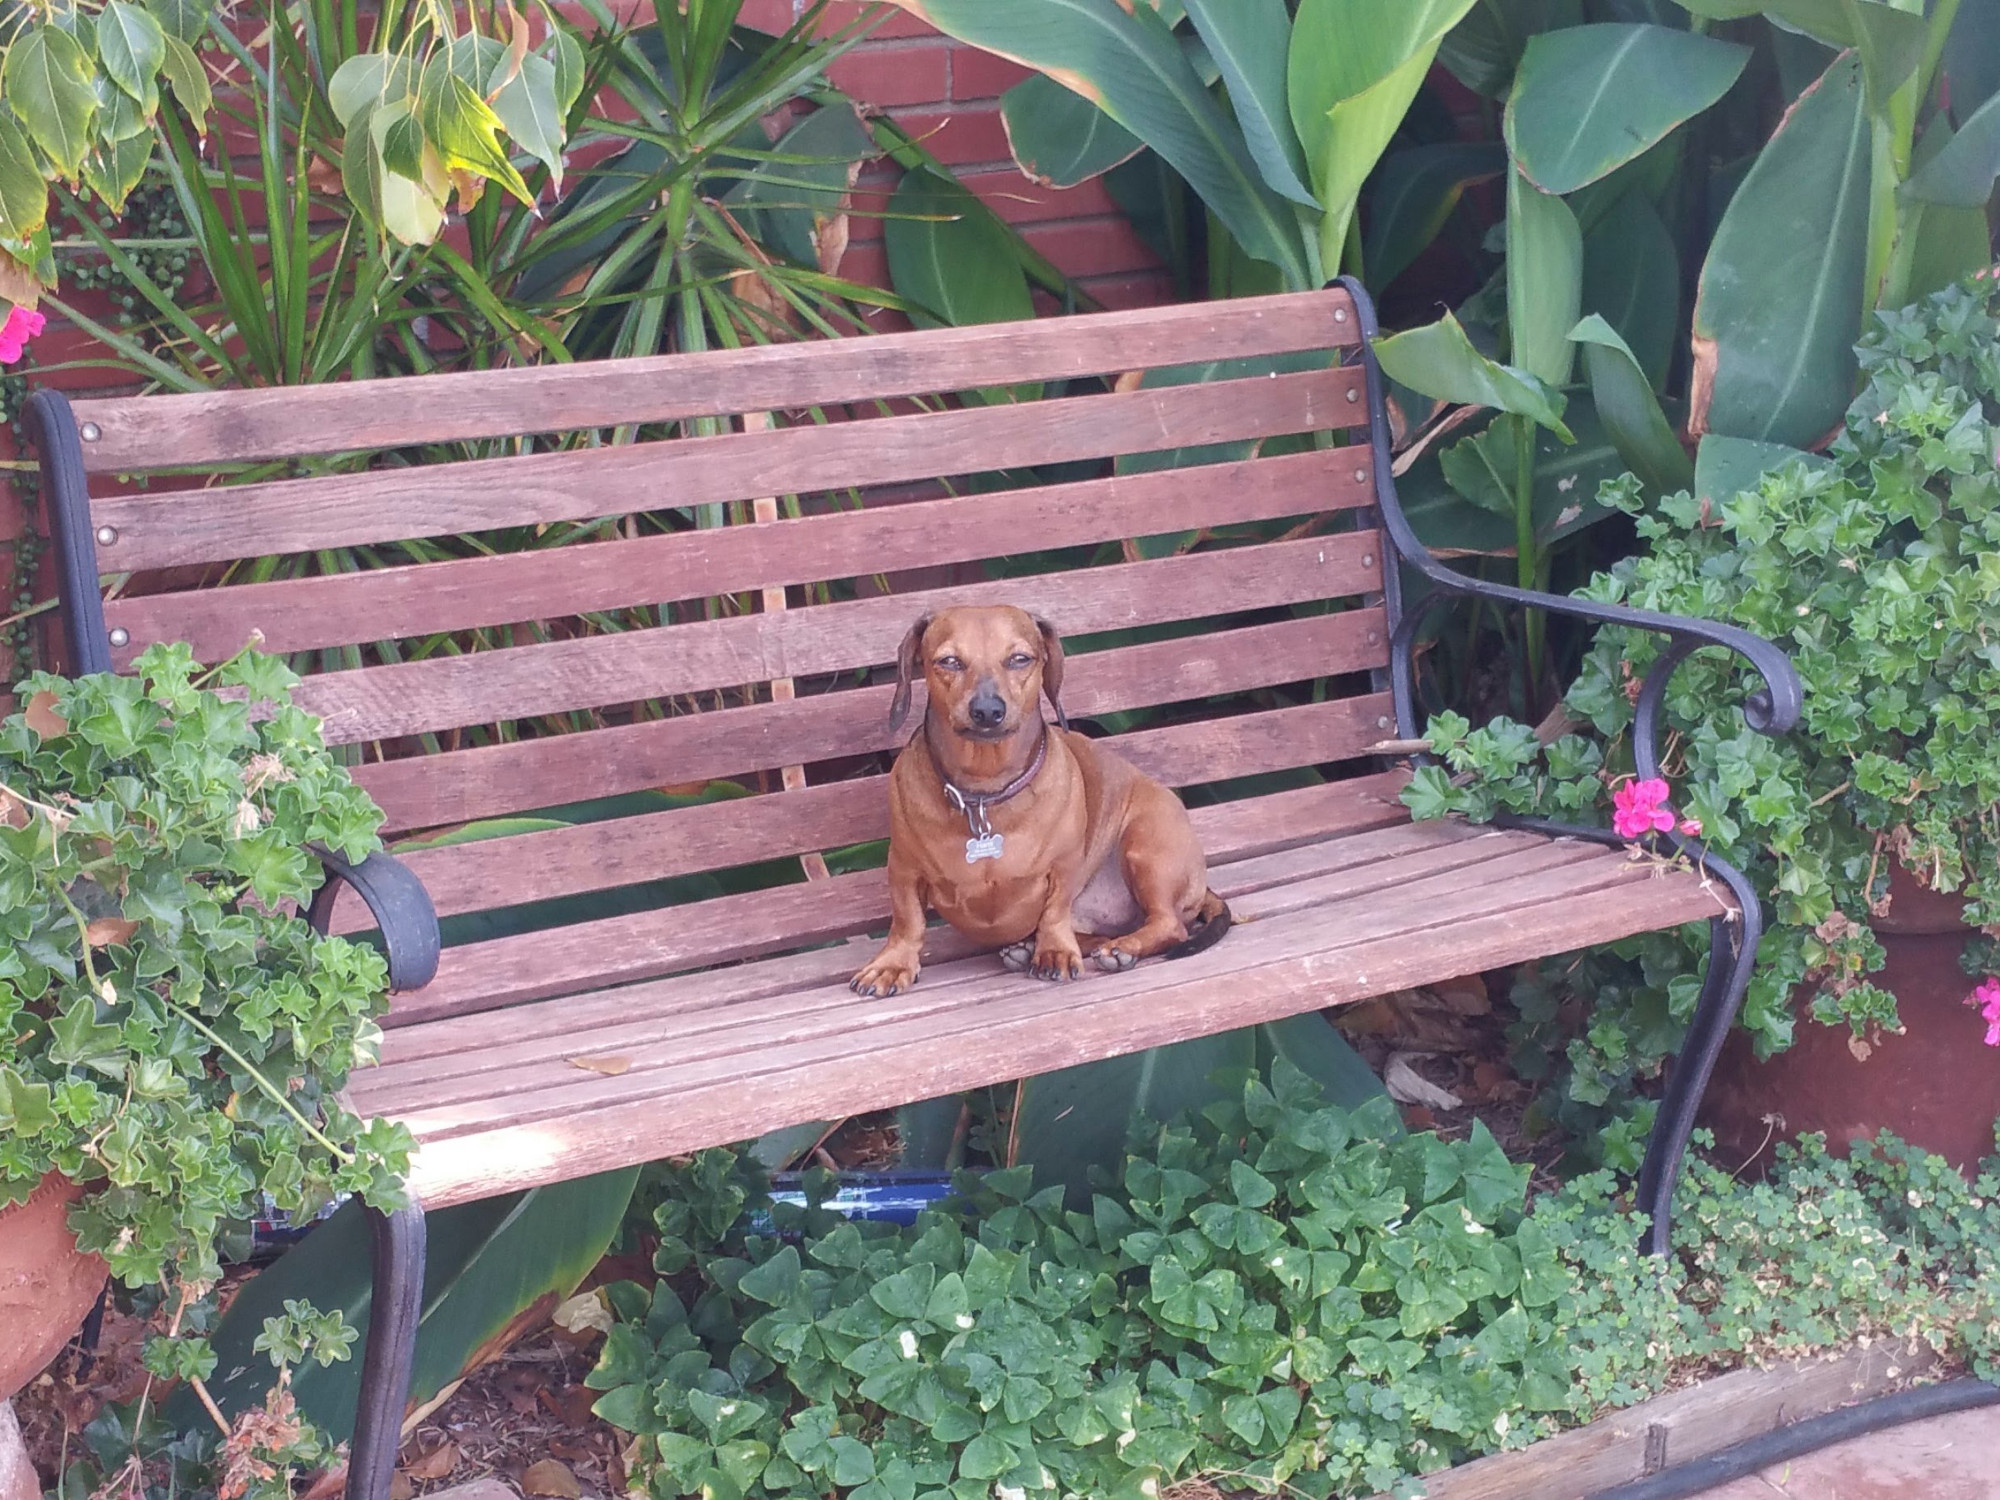 A dachshund sitting by himself on a park bench